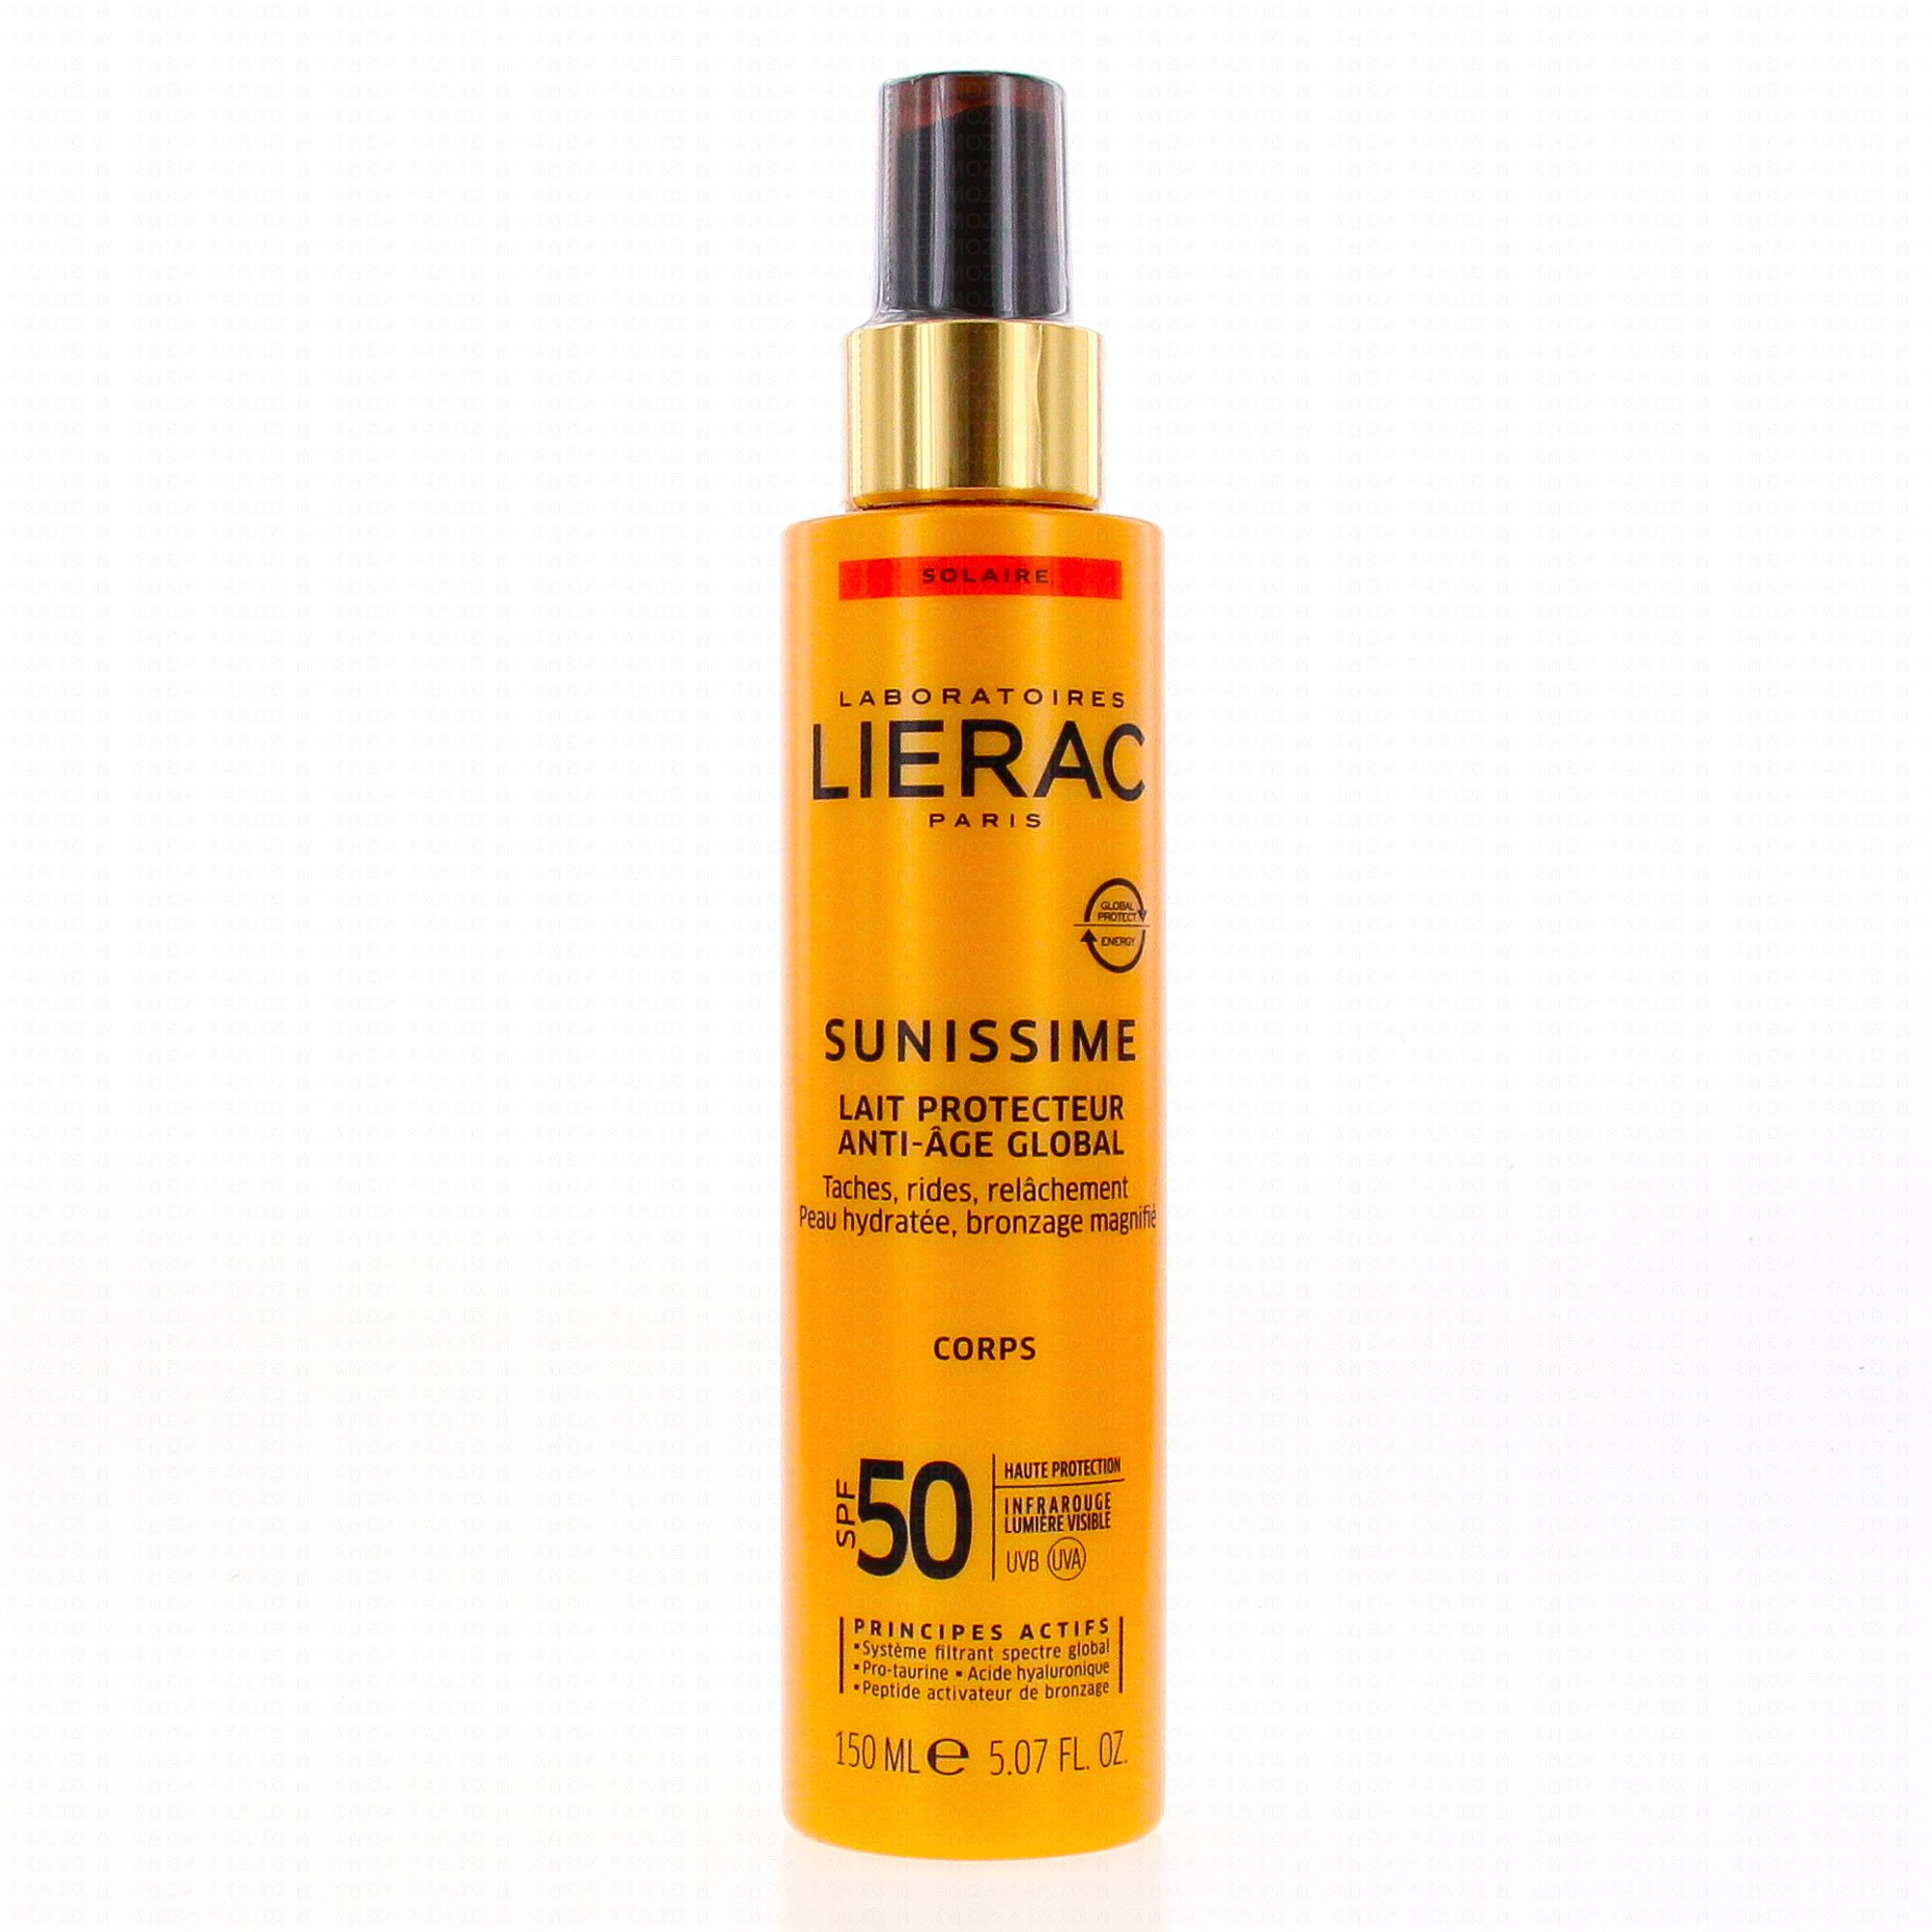 LIERAC Sunissime lapte protector energizant corp SPF50 x 150ml